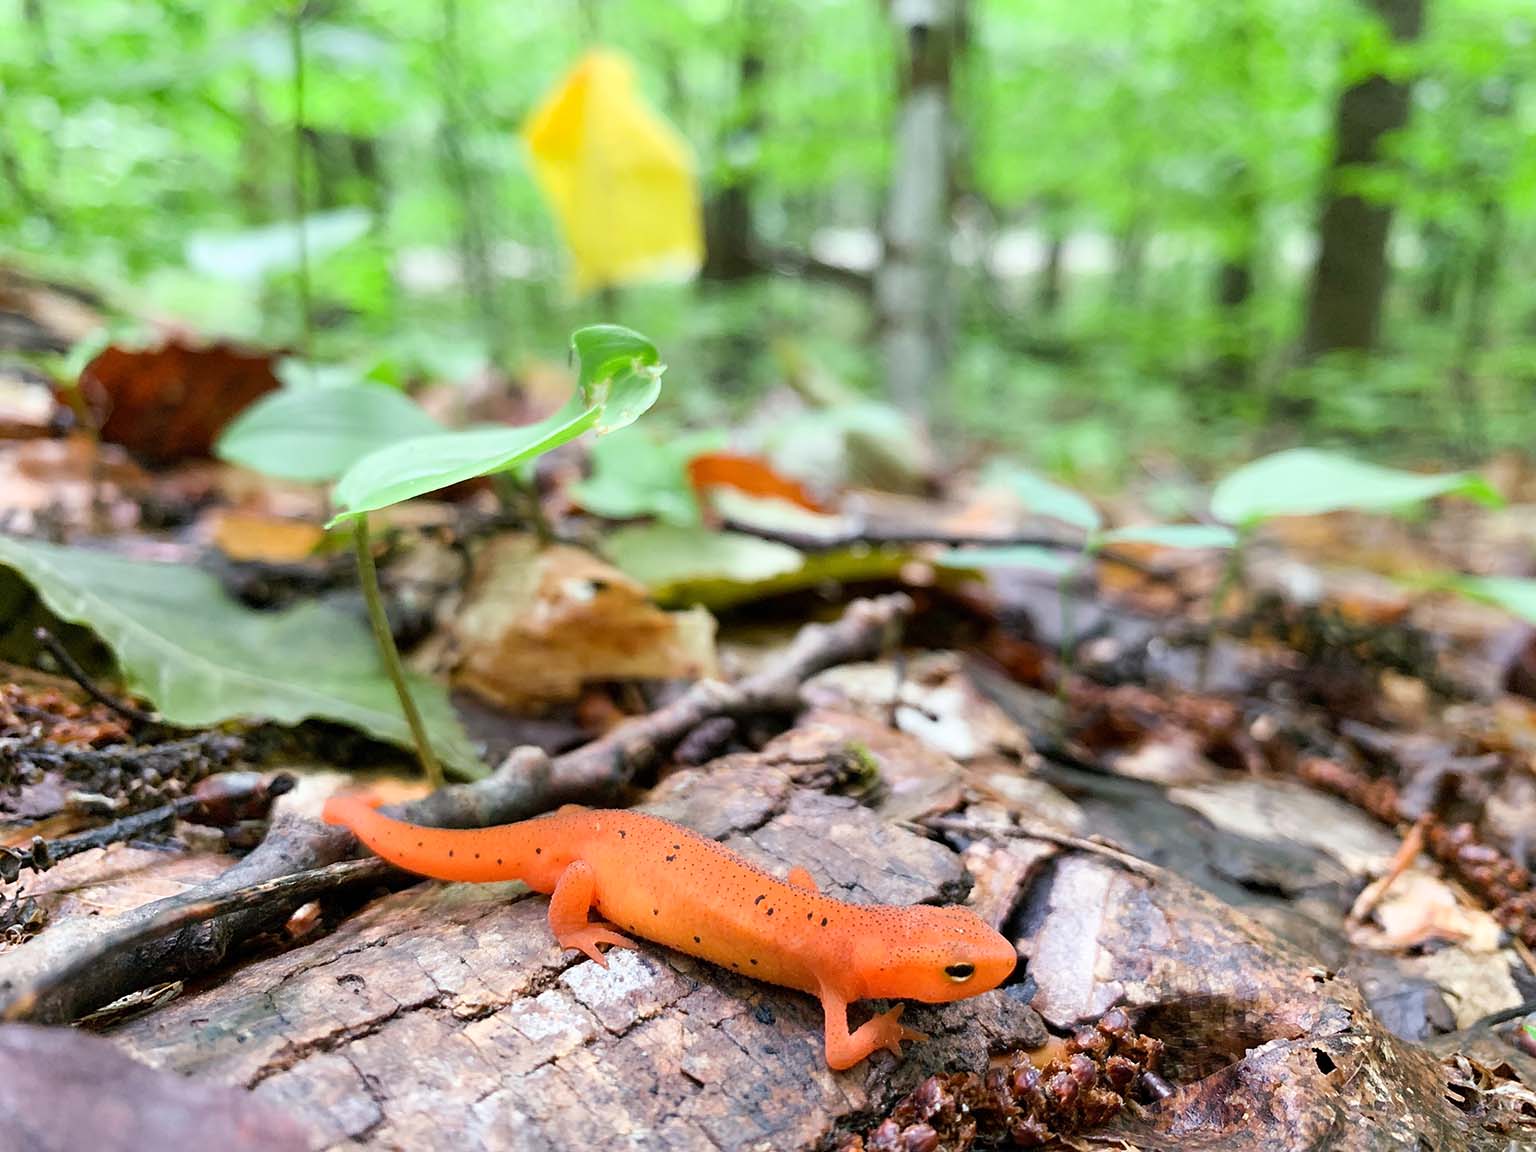 An orange newt rests on a decaying log on the forest floor.